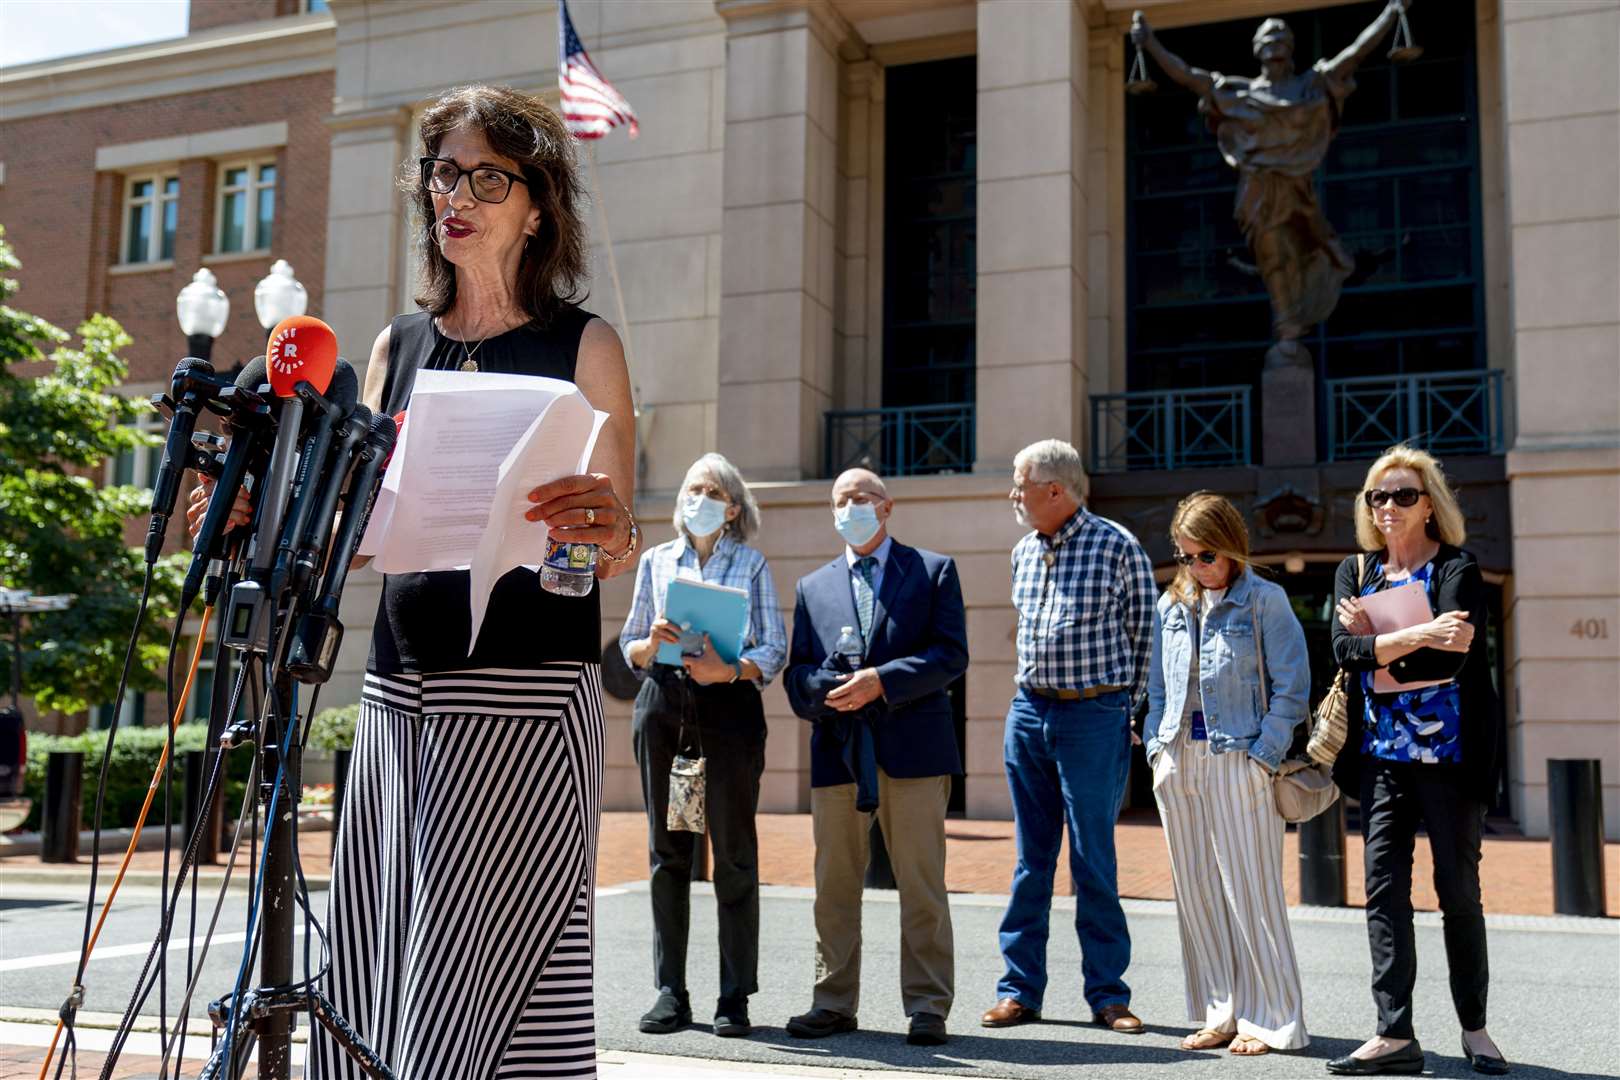 Ms Foley was joined outside the court by members of other victims’ families (Andrew Harnik/AP)